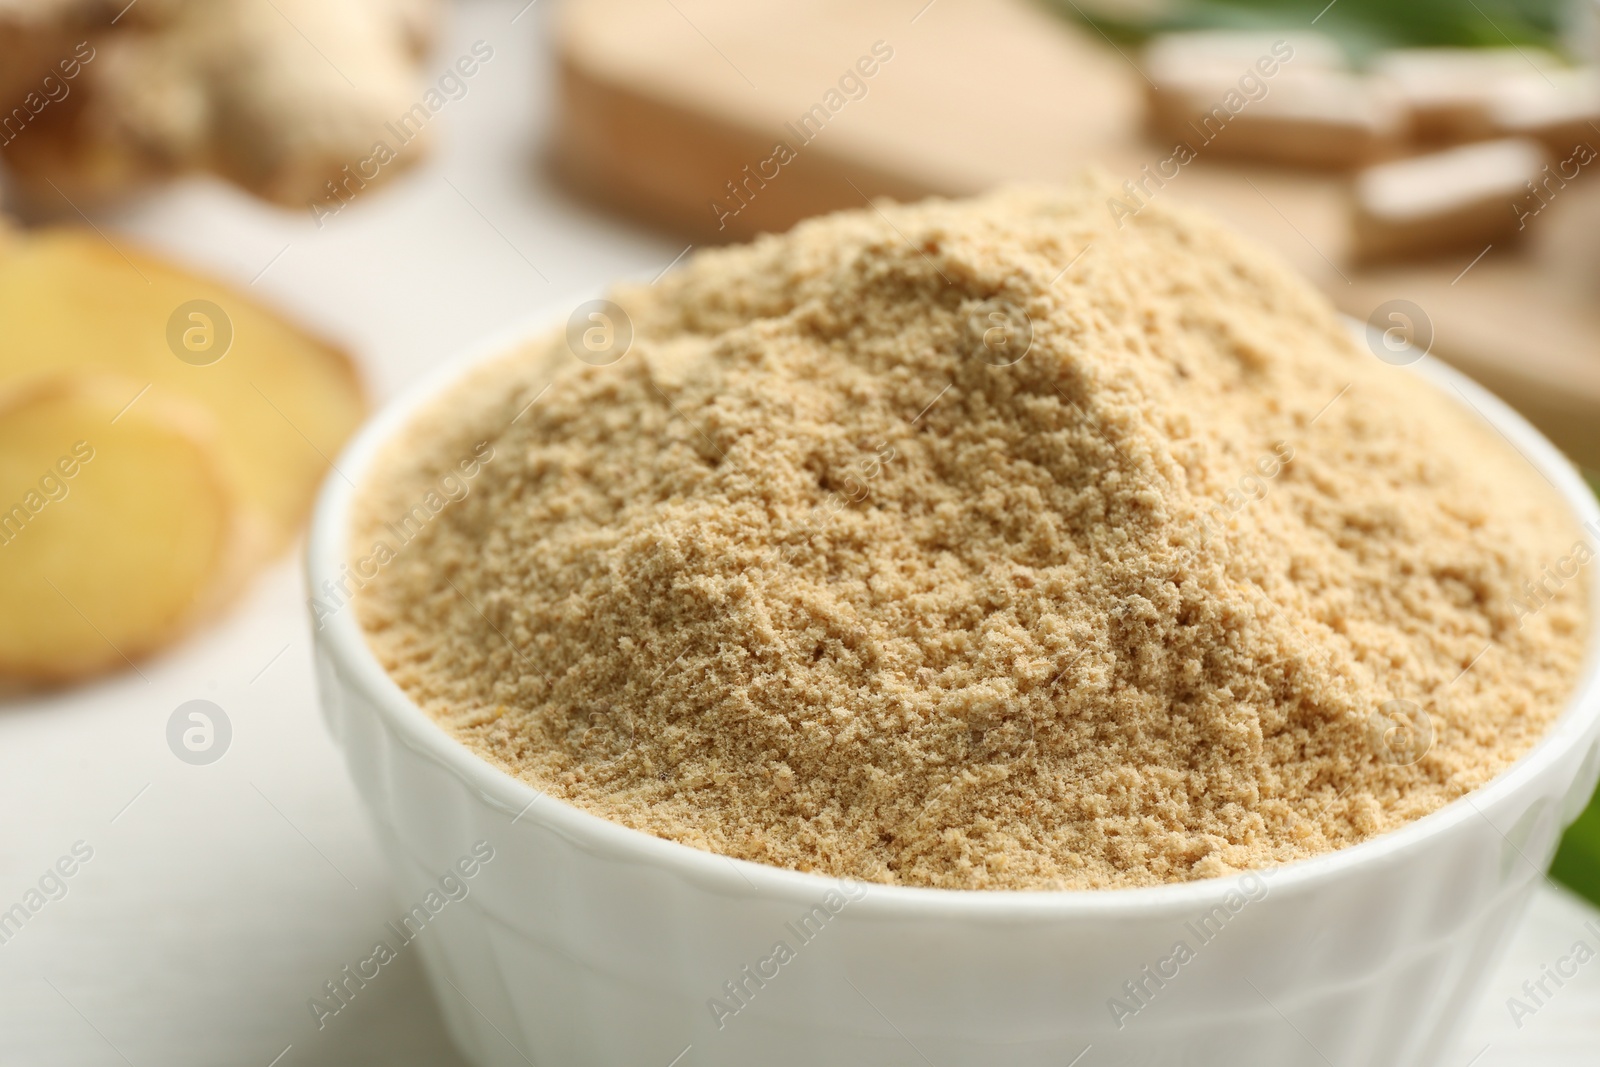 Photo of Dry powdered ginger in bowl, closeup view